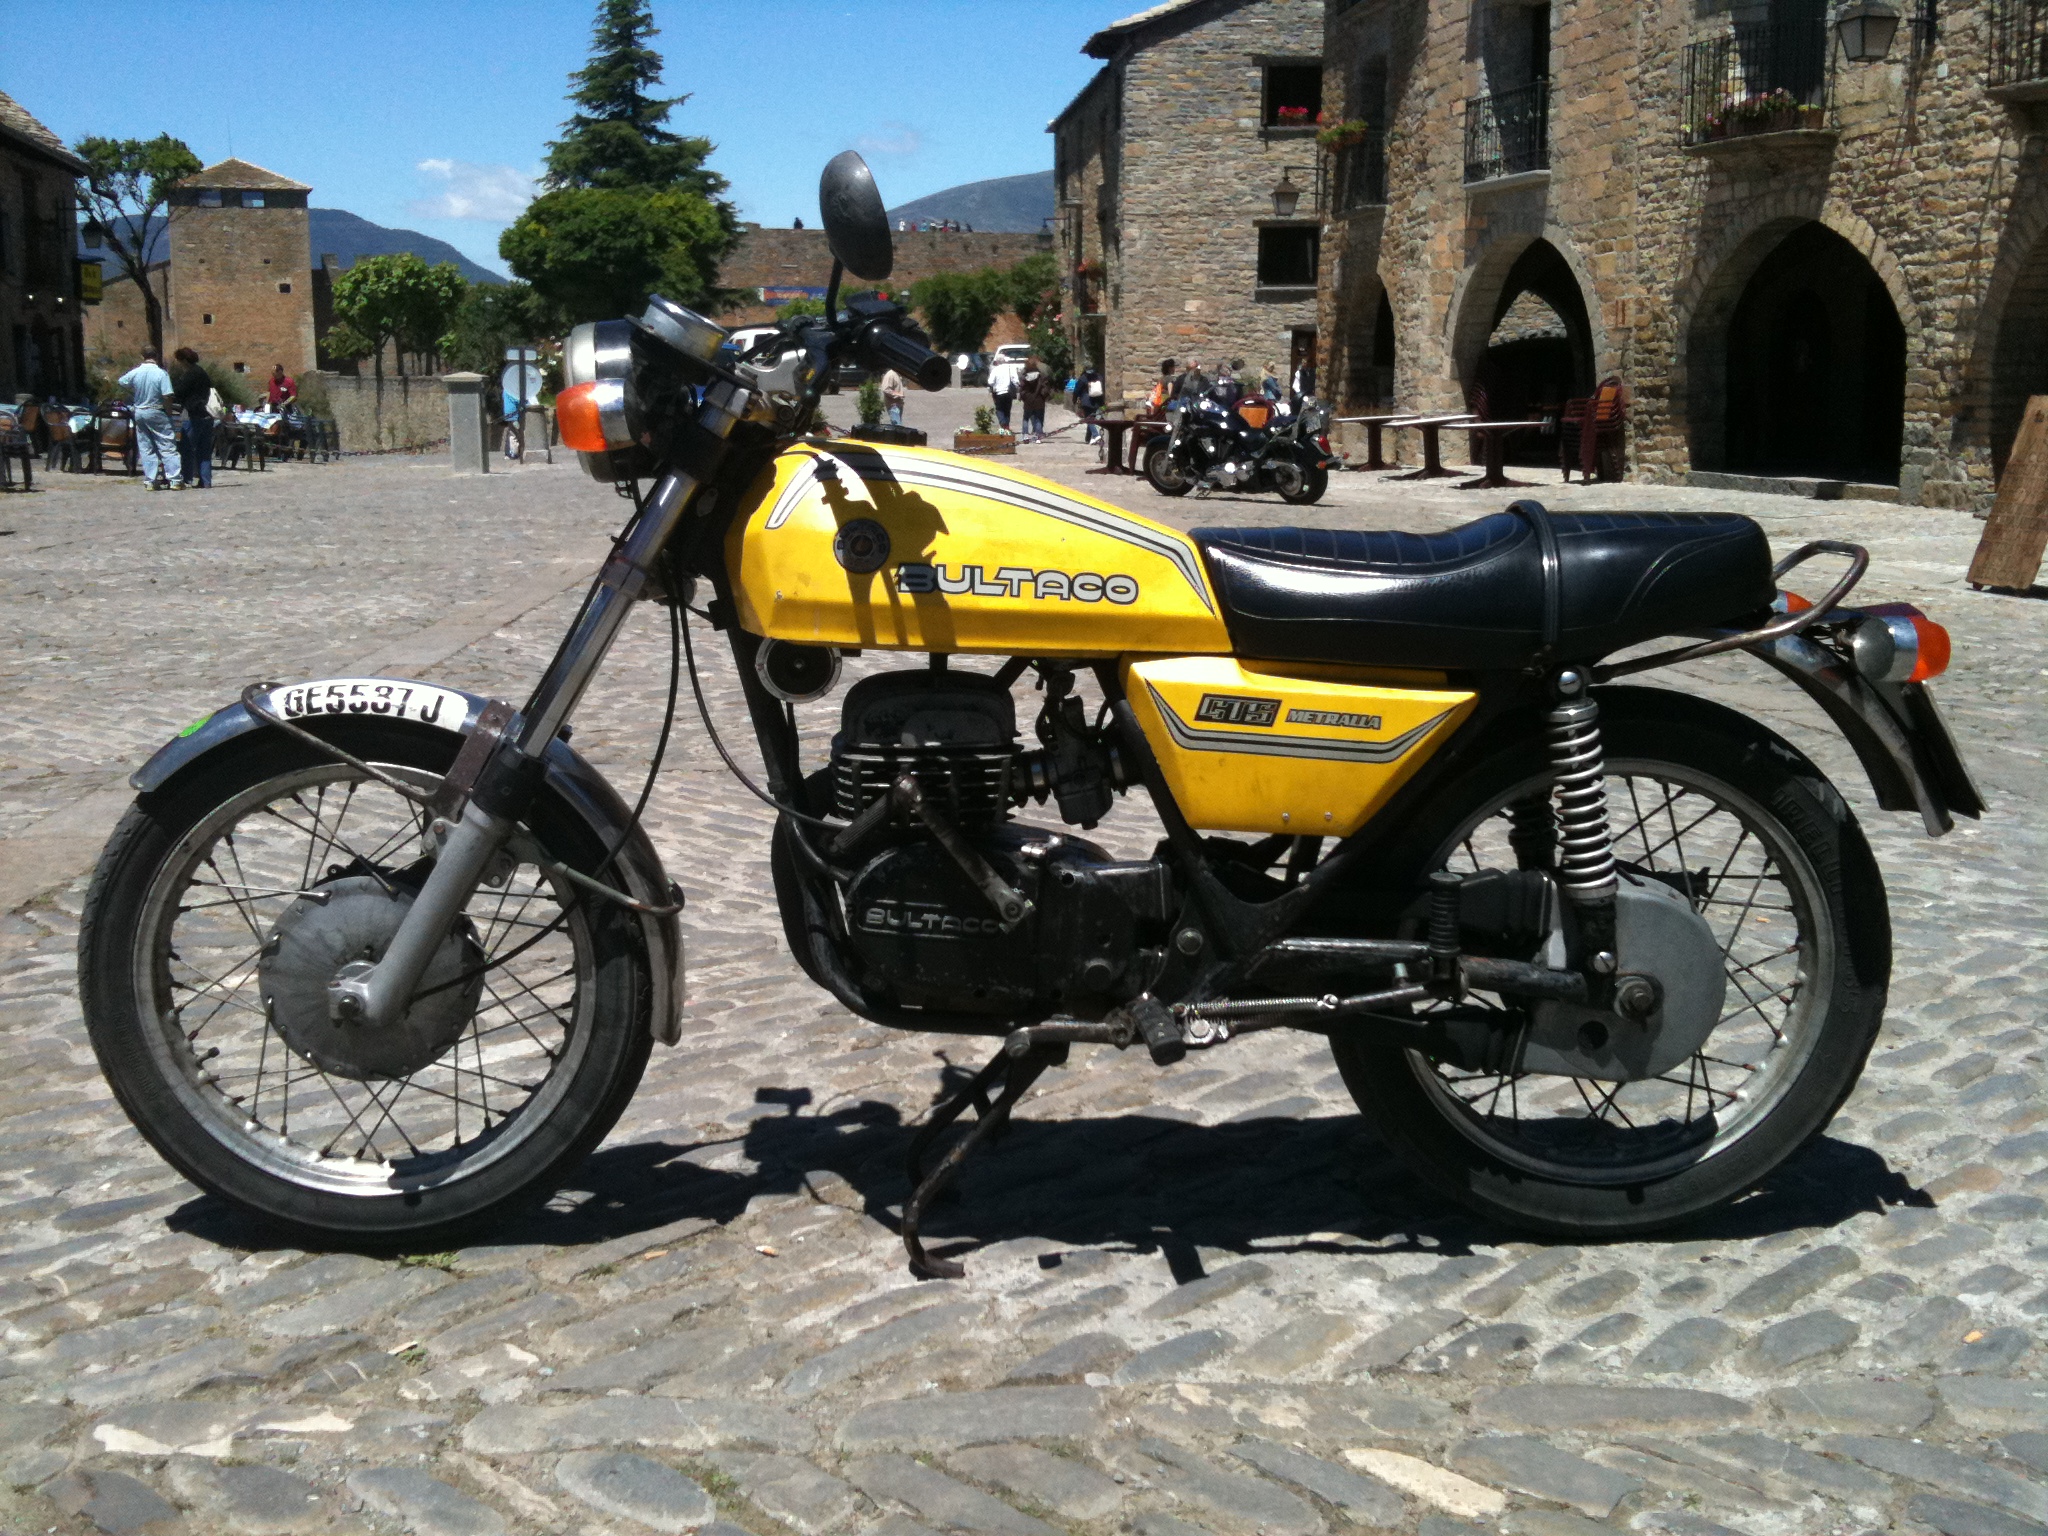 Bultaco metralla gt. Best photos and information of modification.